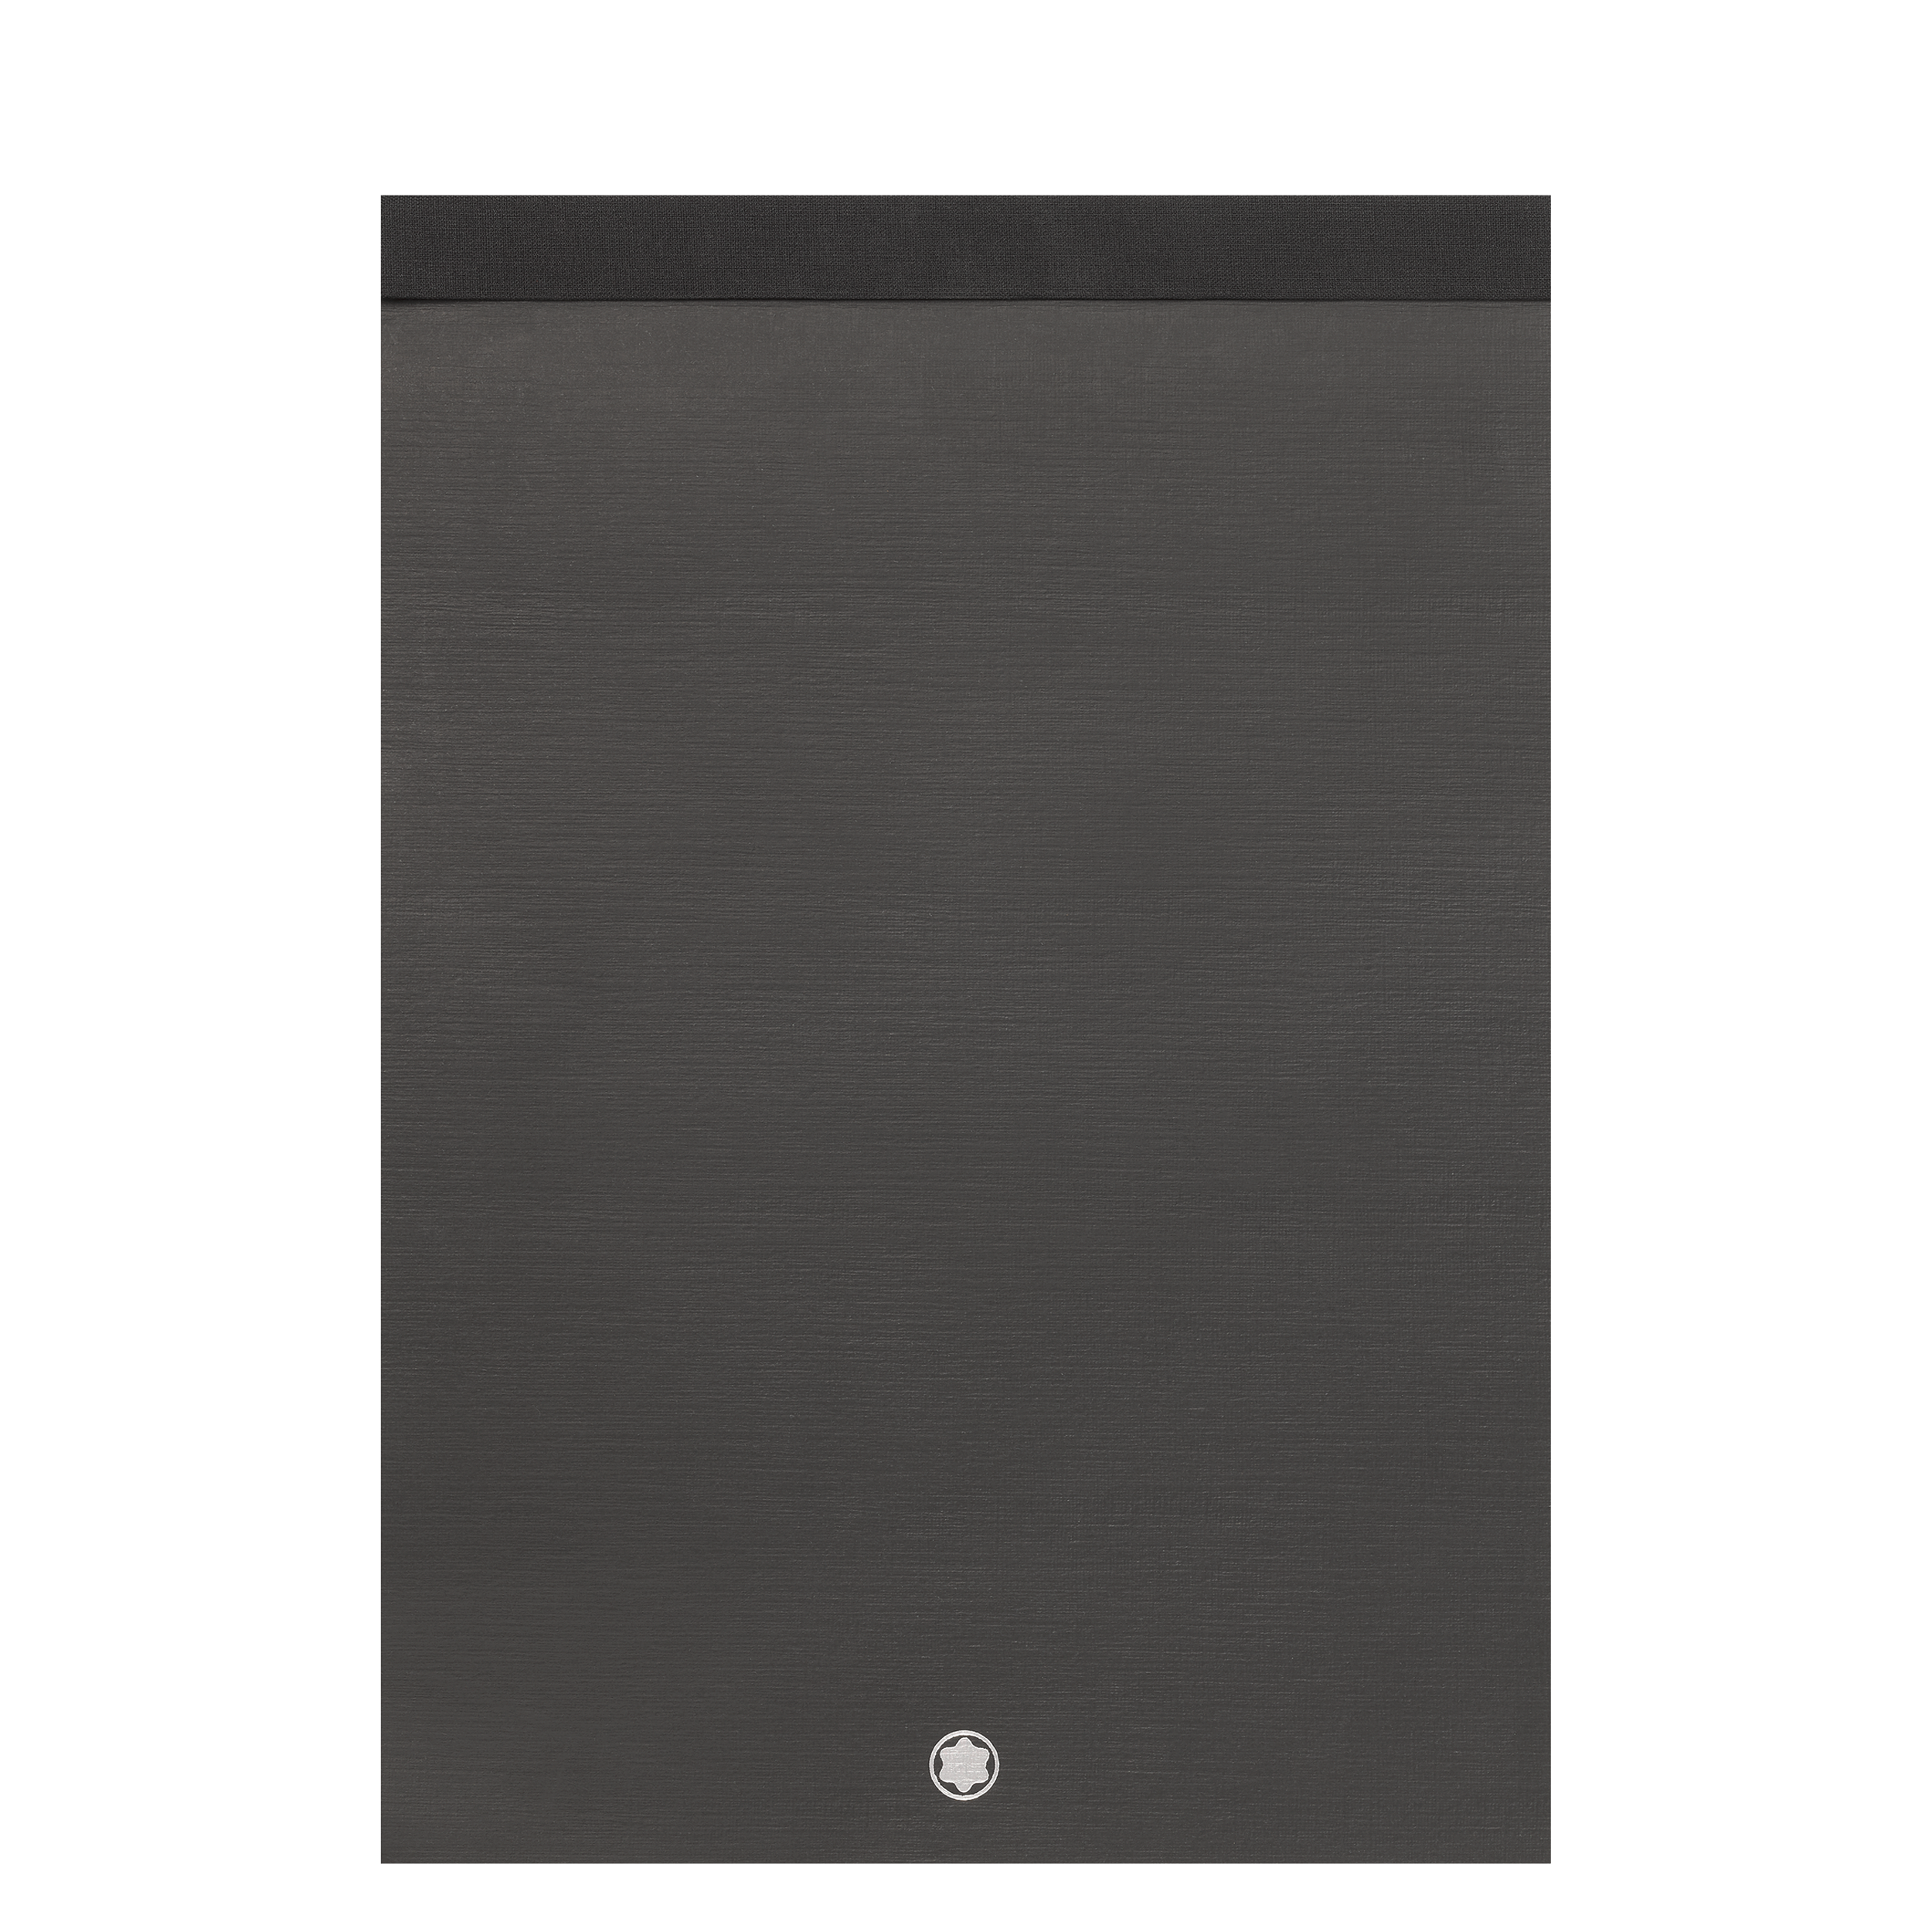 2 Montblanc Fine Stationery Notebooks #149 Slim, black, lined for Augmented Paper +, image 1